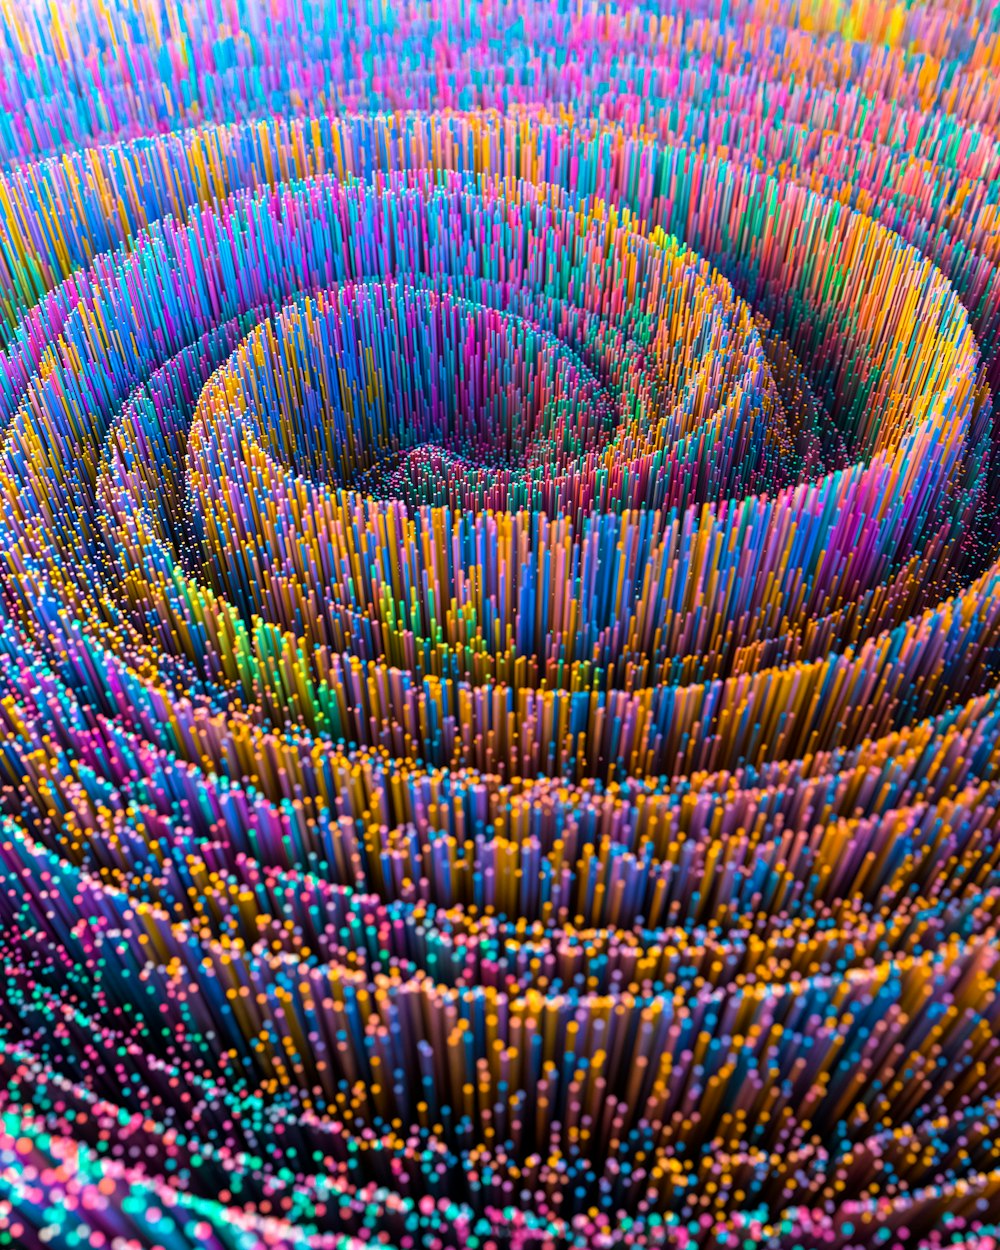 a large group of colored pencils are arranged in a spiral